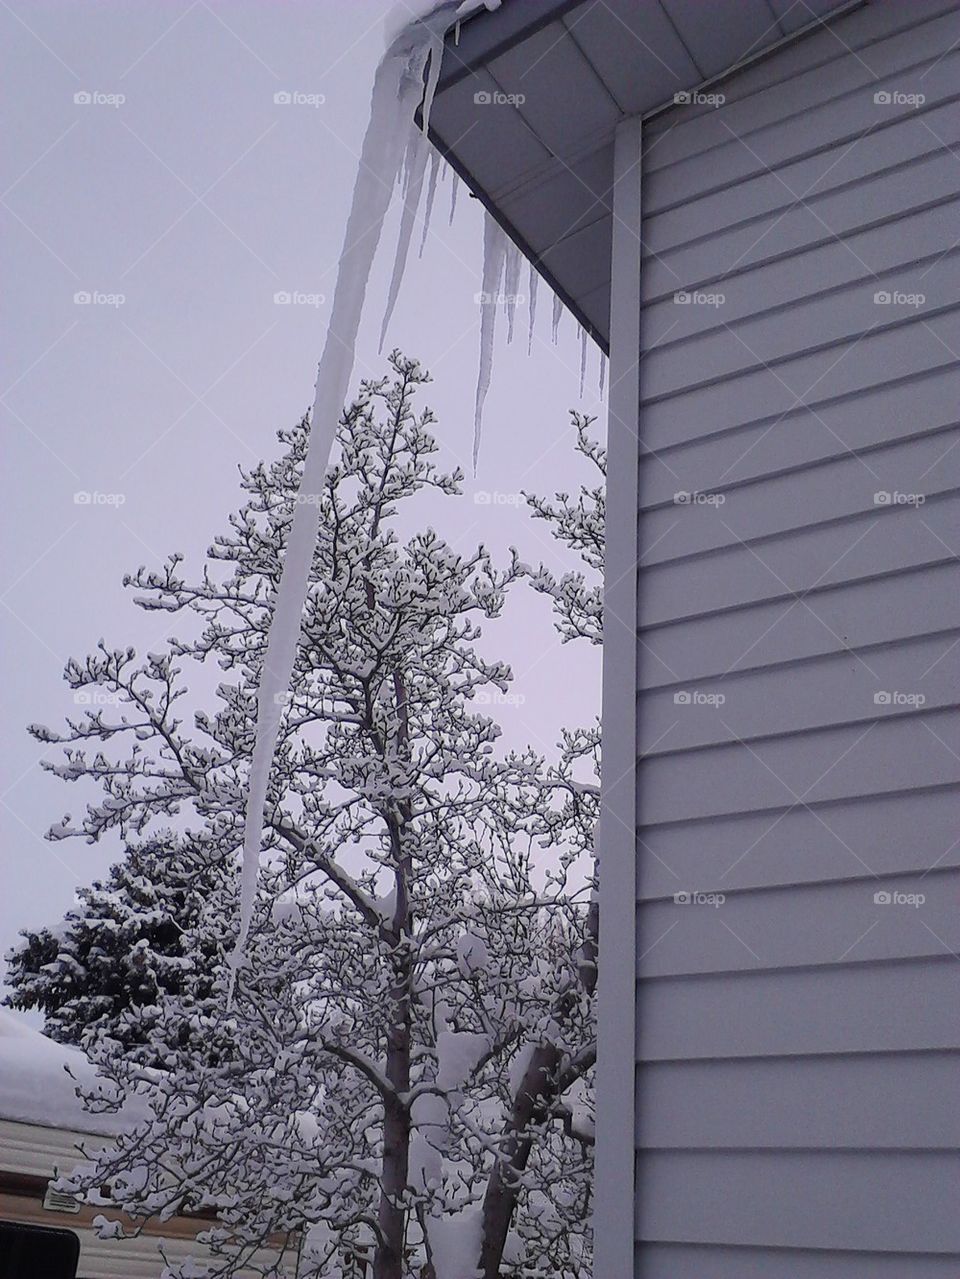 The icicle 